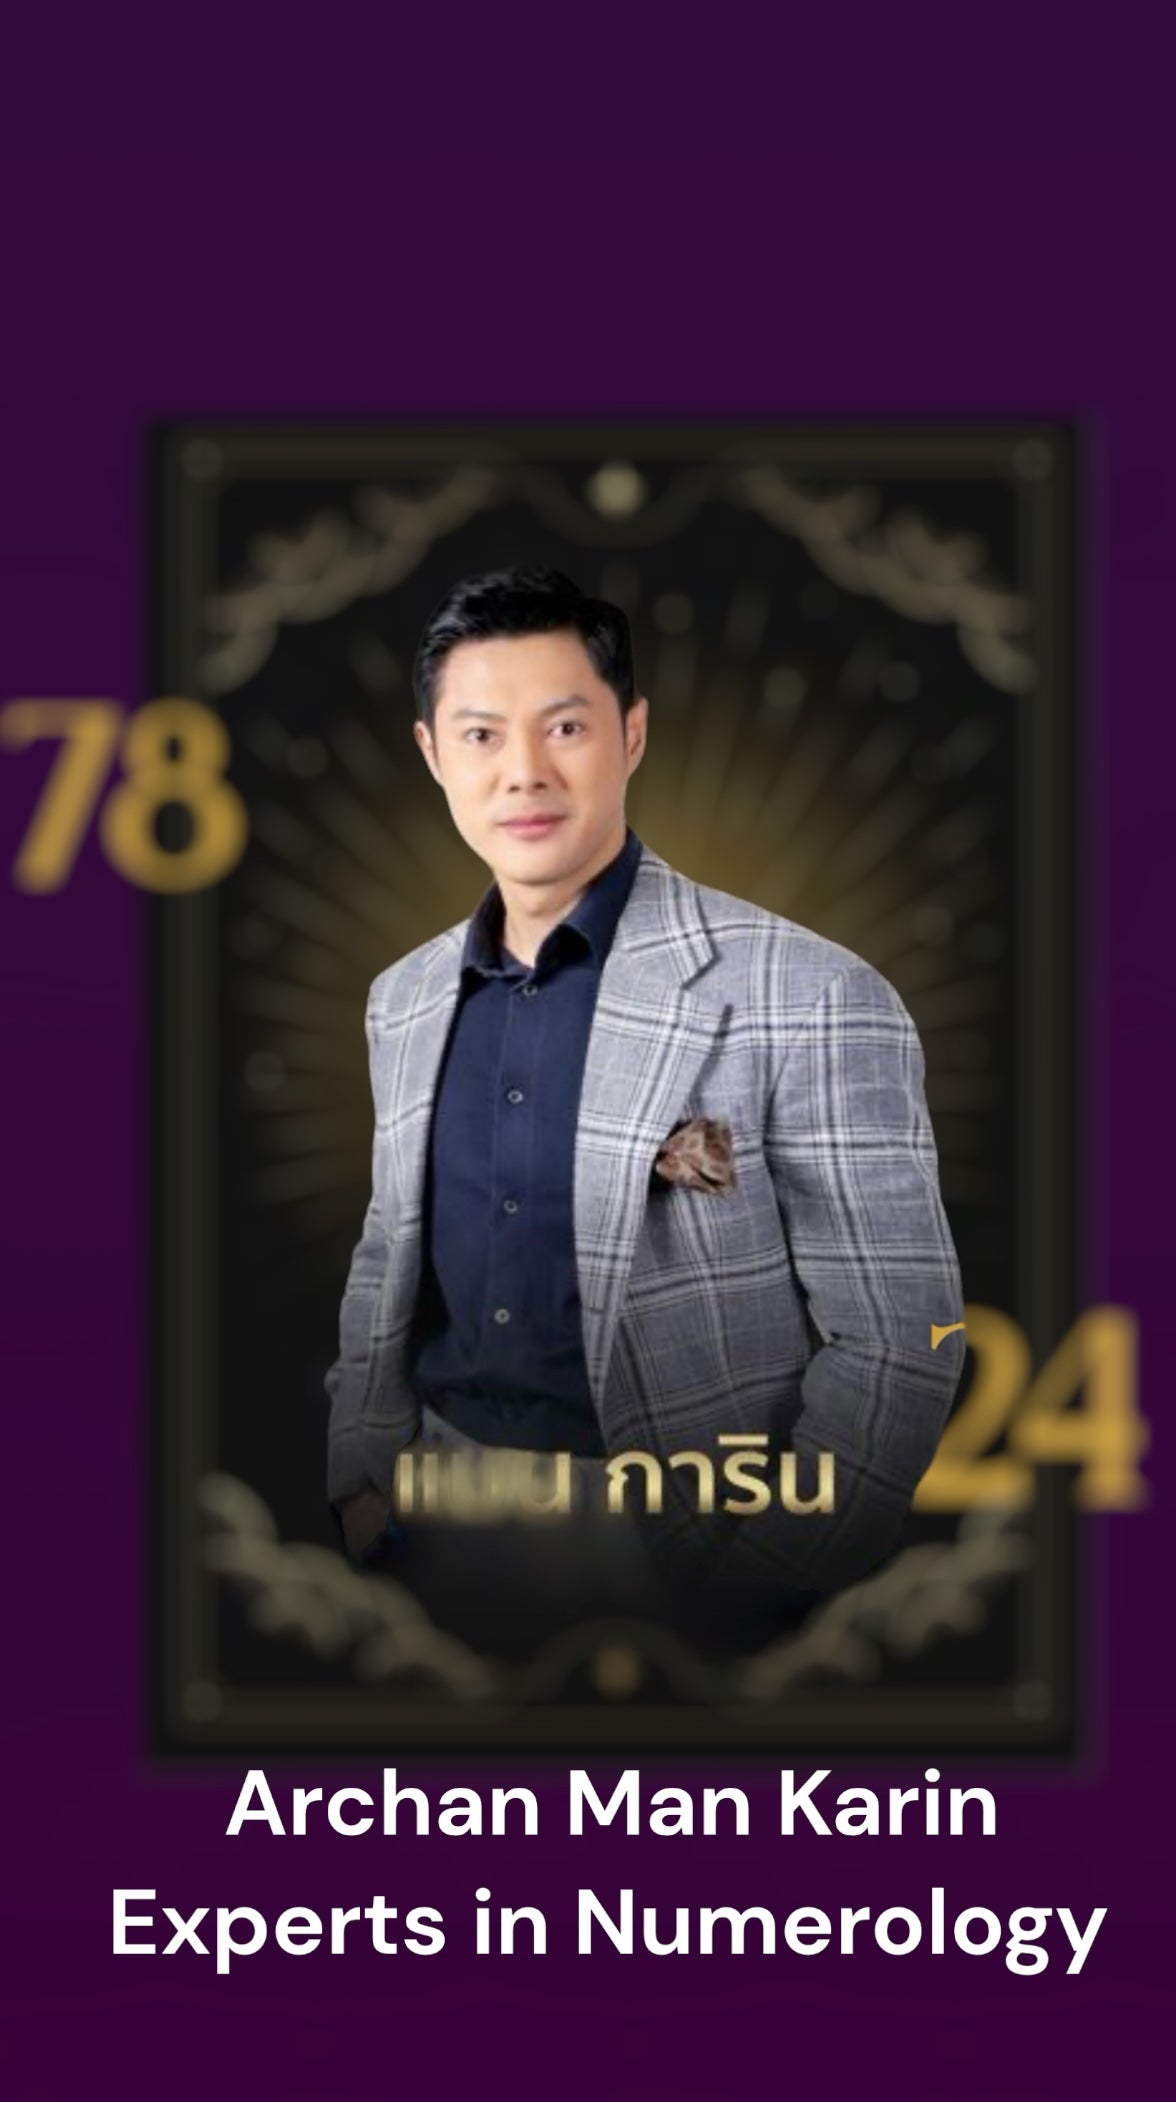 💰WEALTH💰👷‍♂️🧑‍🚒PROTECTION👷‍♂️Expert astrologists in Thailand have collaborated to create a special digital wallpaper for all phone models, featuring a customized image of TAOWESUWAN.